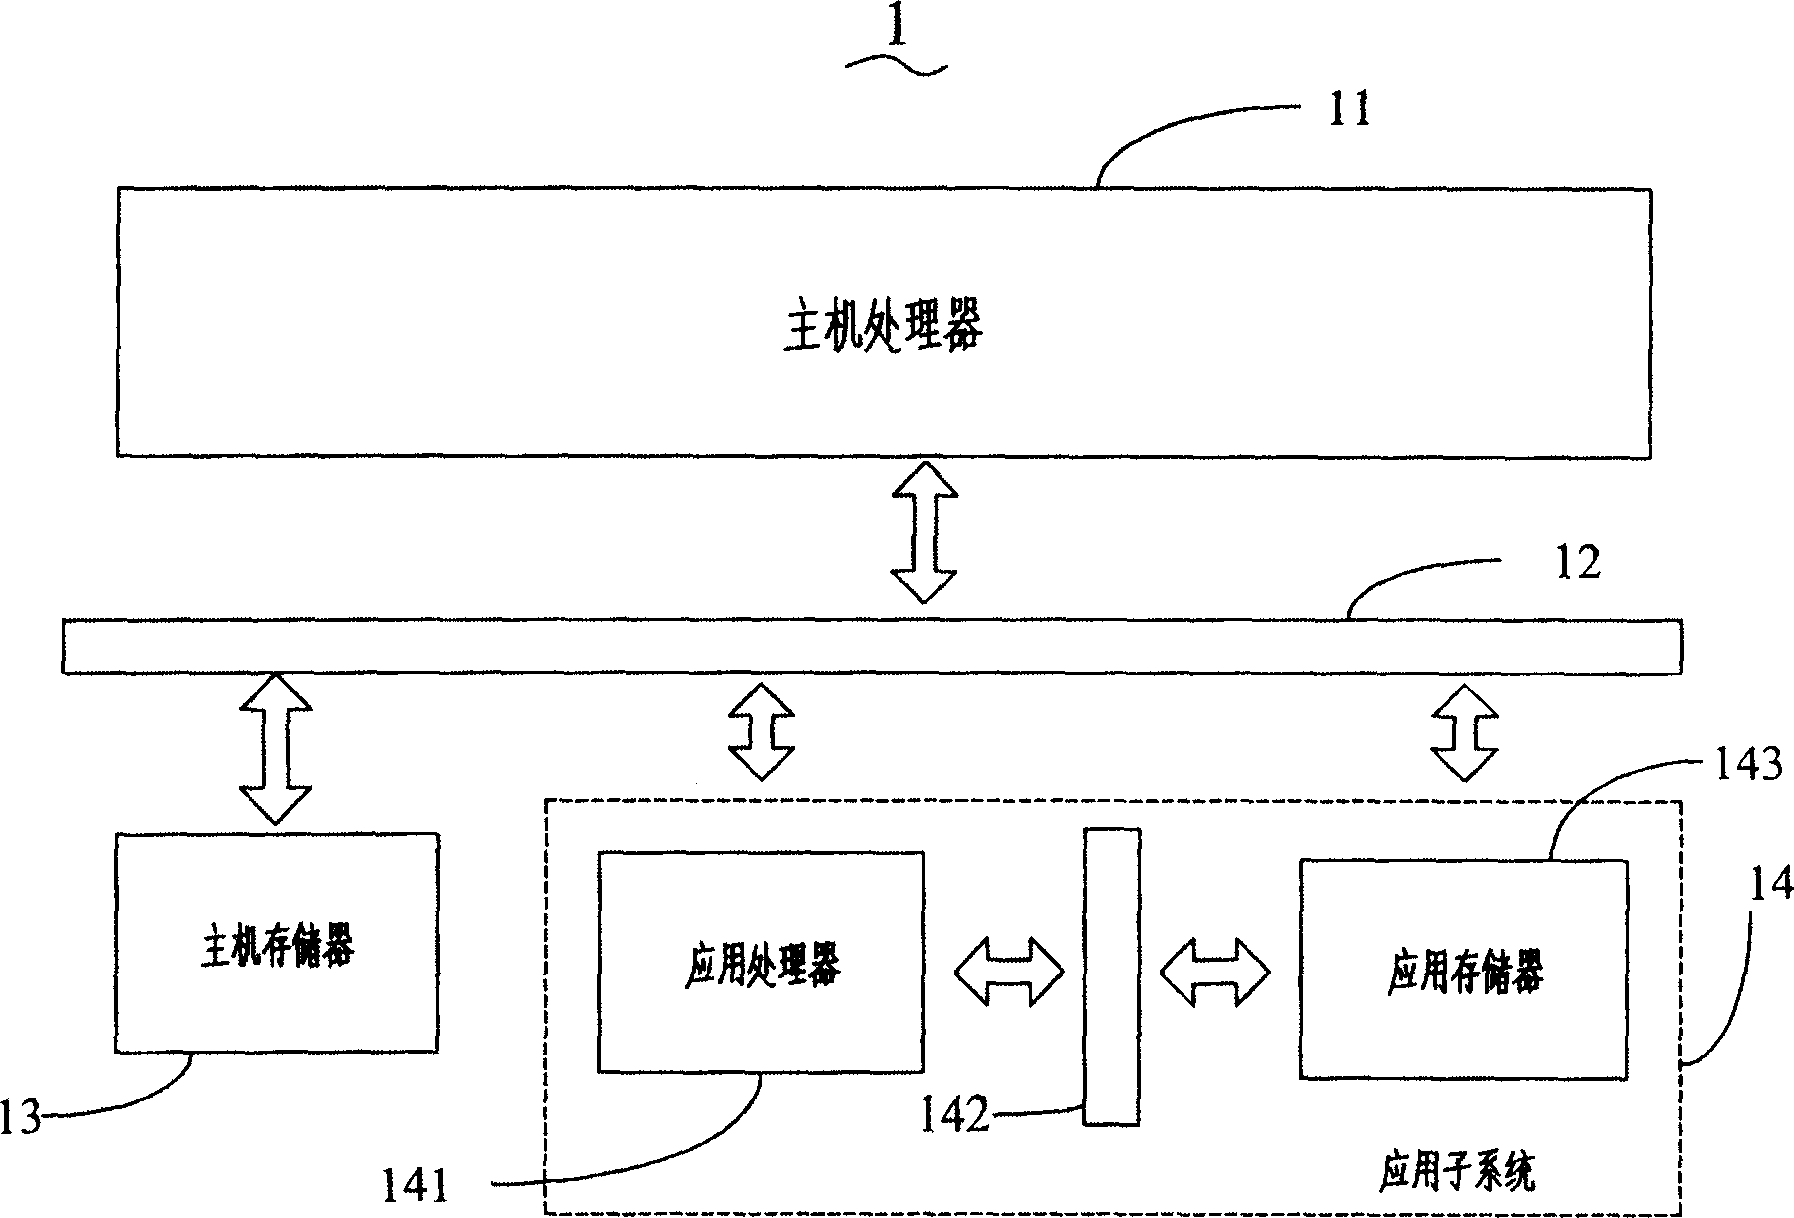 Embedded type parallel computation system and embedded type parallel computing method